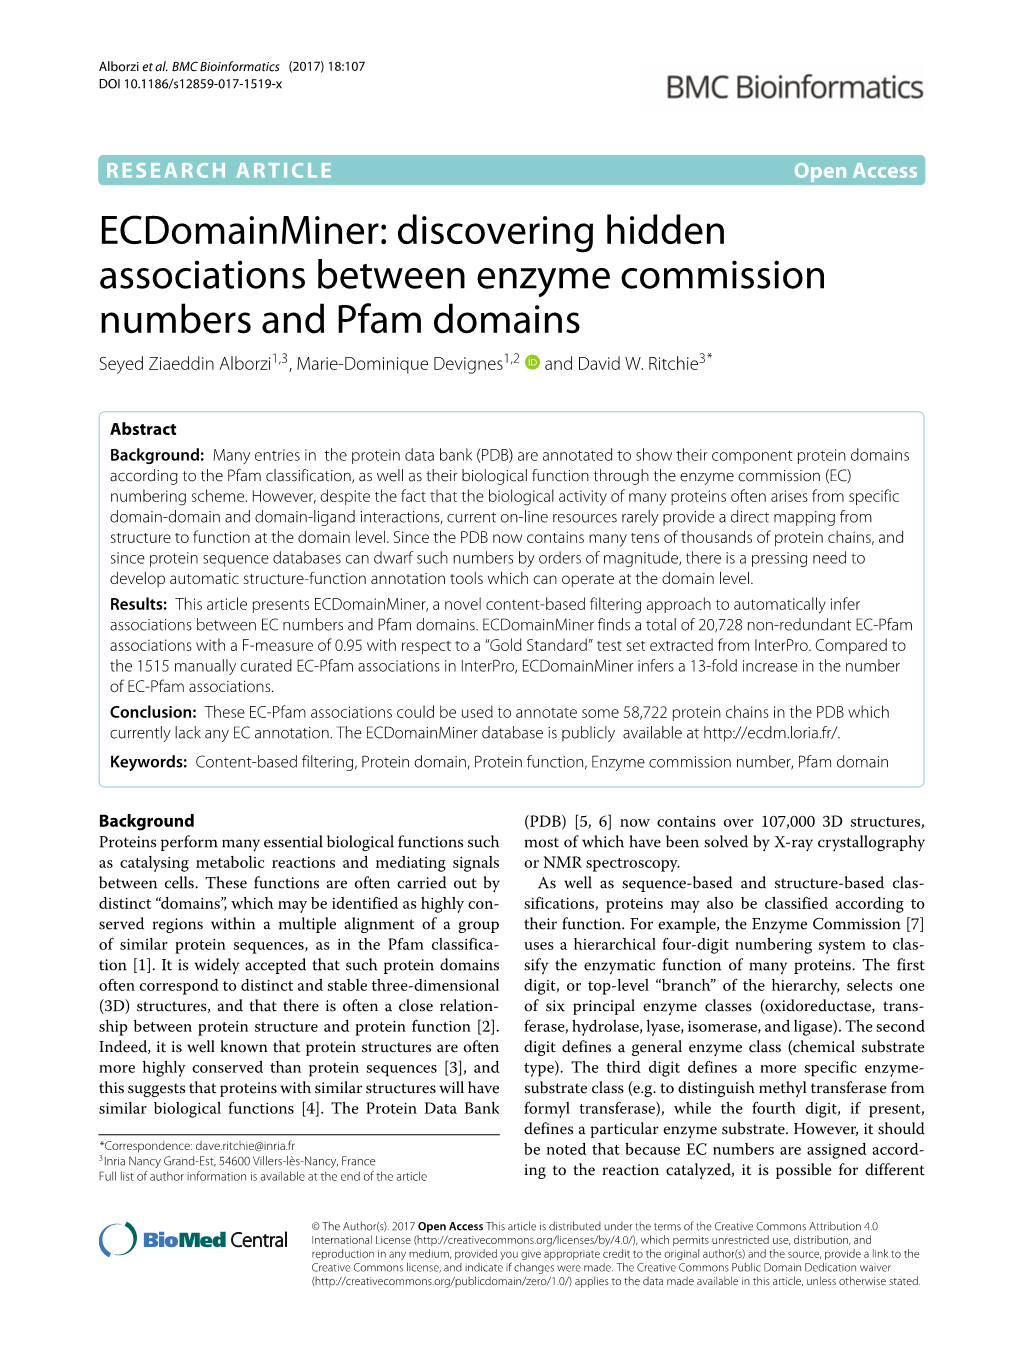 Discovering Hidden Associations Between Enzyme Commission Numbers and Pfam Domains Seyed Ziaeddin Alborzi1,3, Marie-Dominique Devignes1,2 and David W